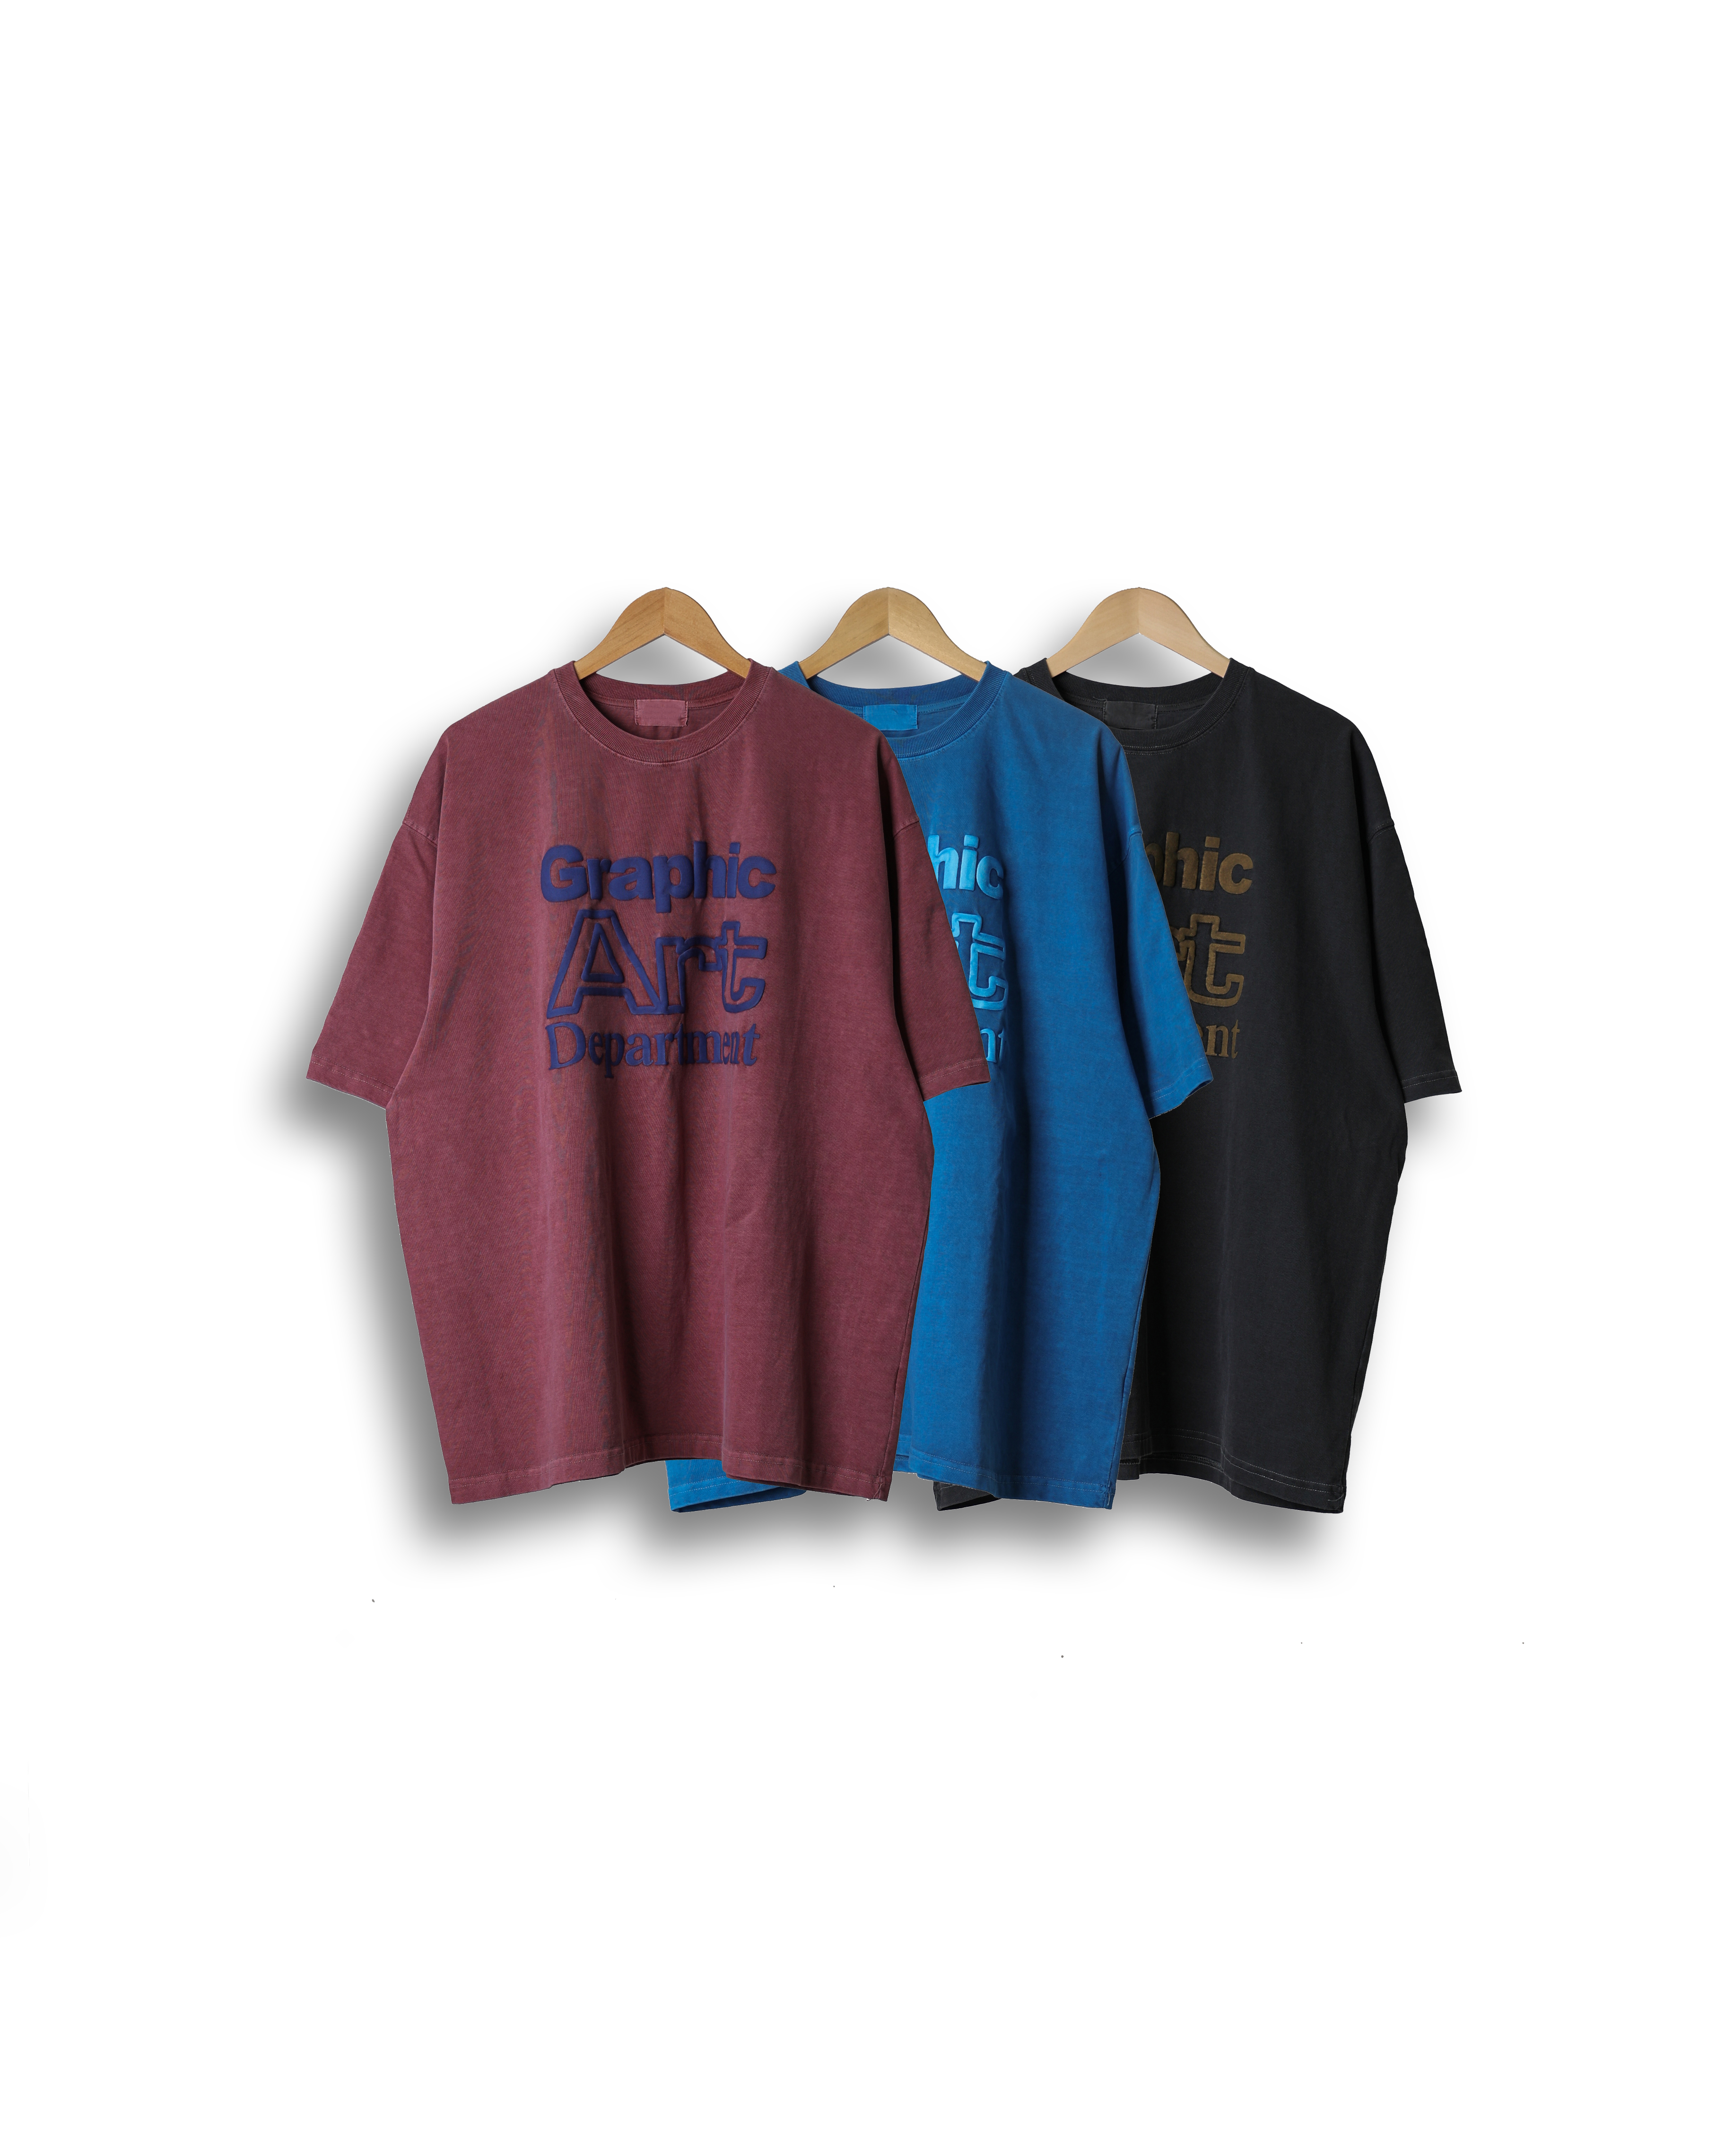 NOOR GRAPHIC Volume Printed T Shirts (Charcoal/Blue/Burgundy)